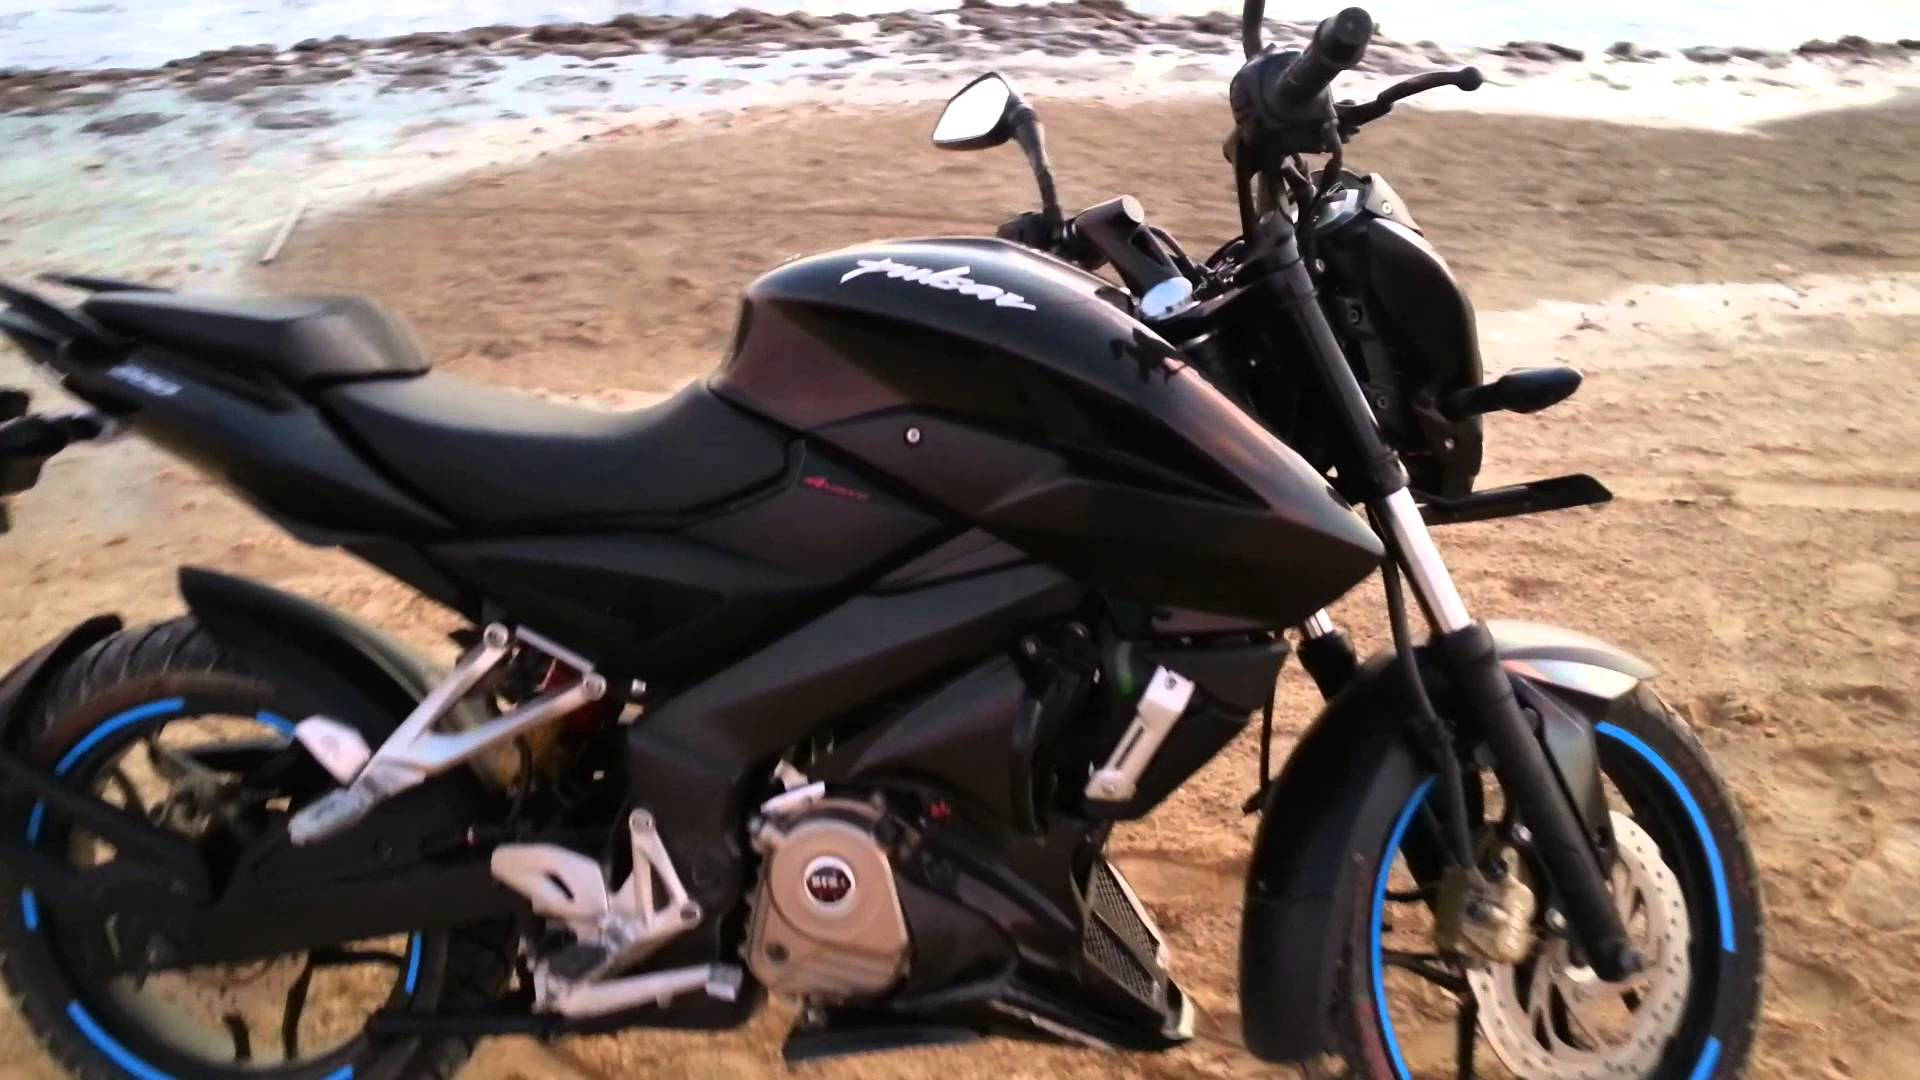 Ns 200 Motorcycle At Beach Background